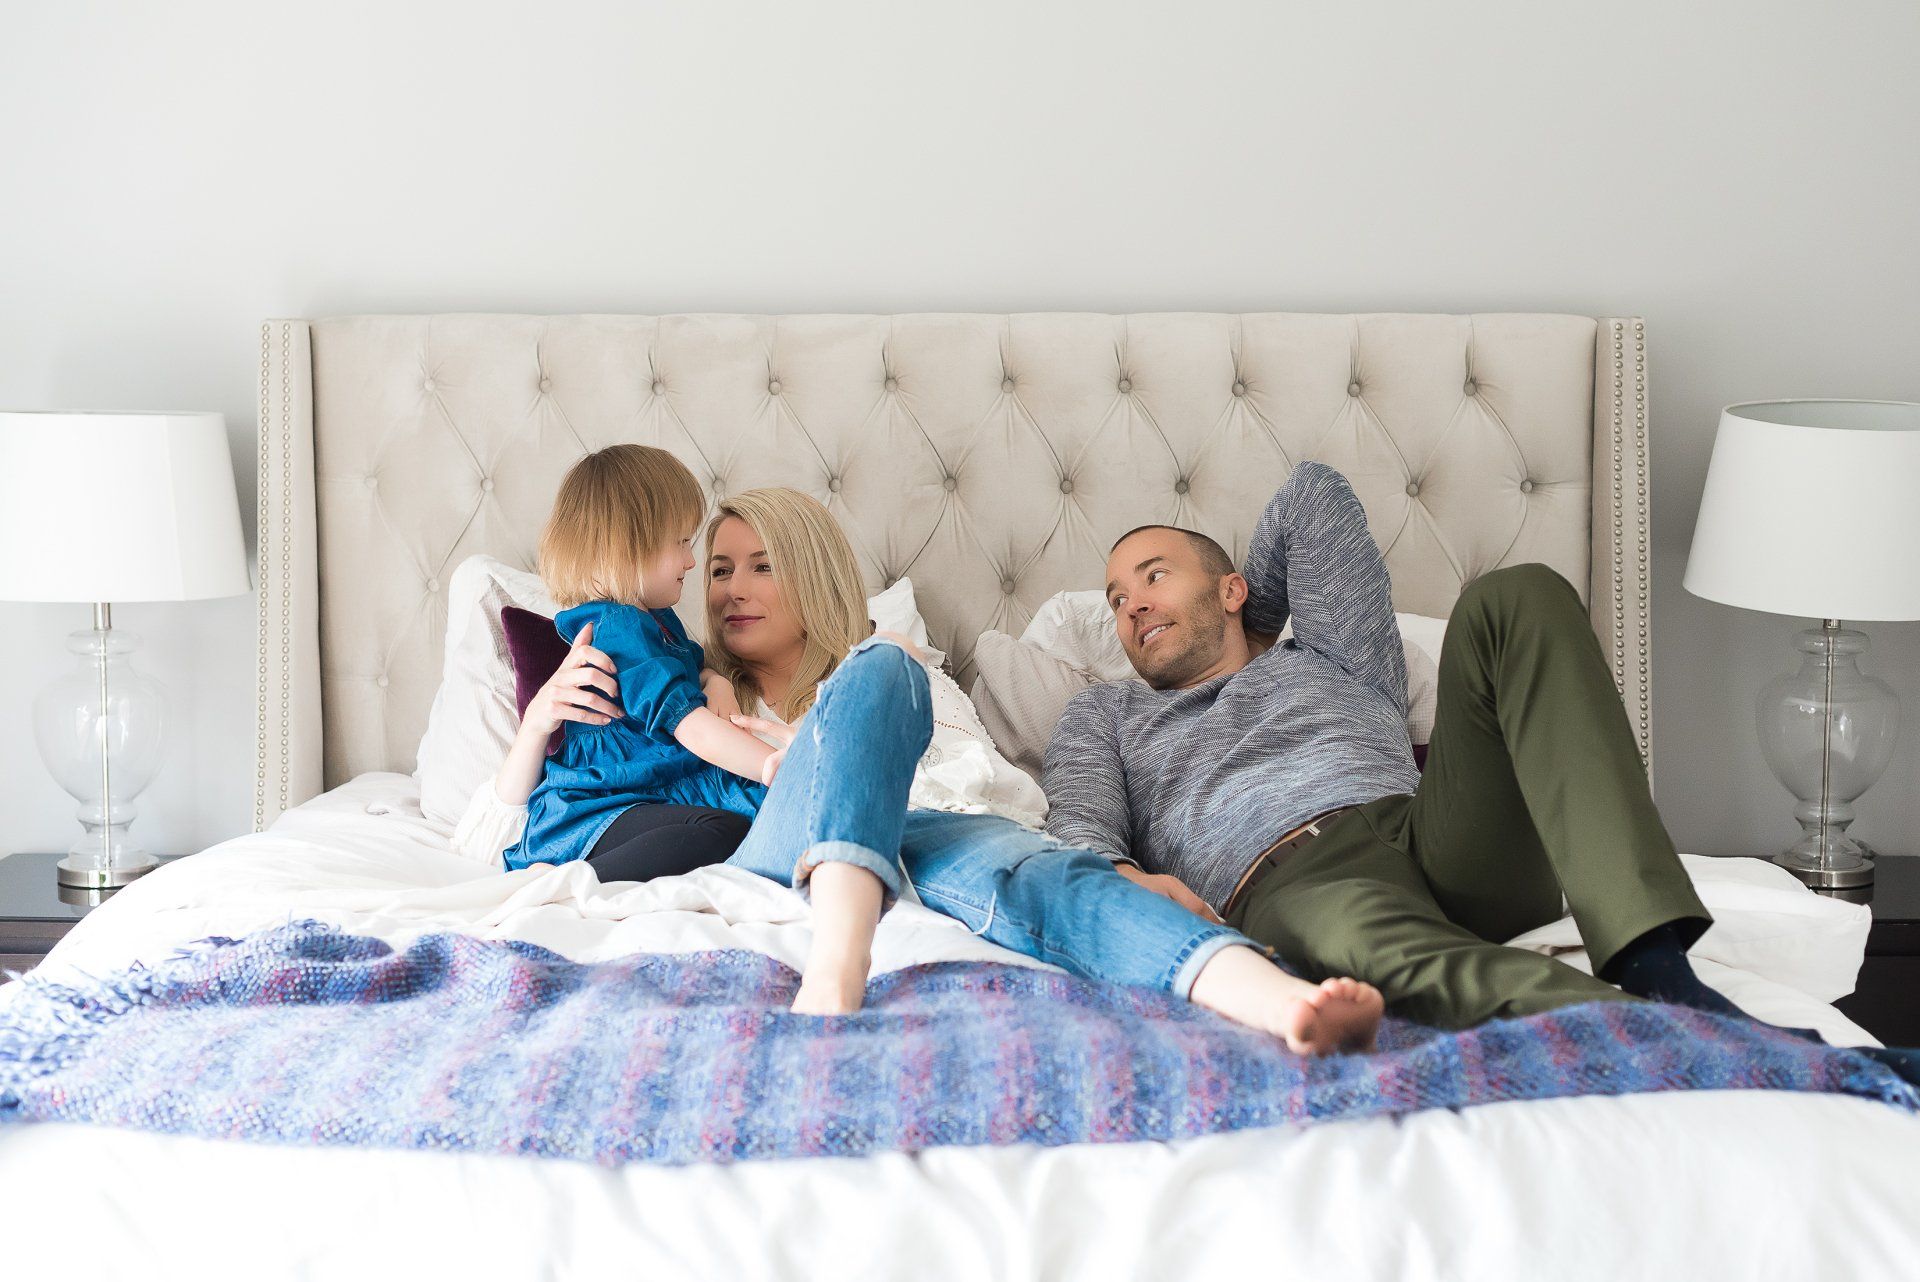 Family photographer Toronto | Stacey Naglie | Man, woman and child lounging on large bed